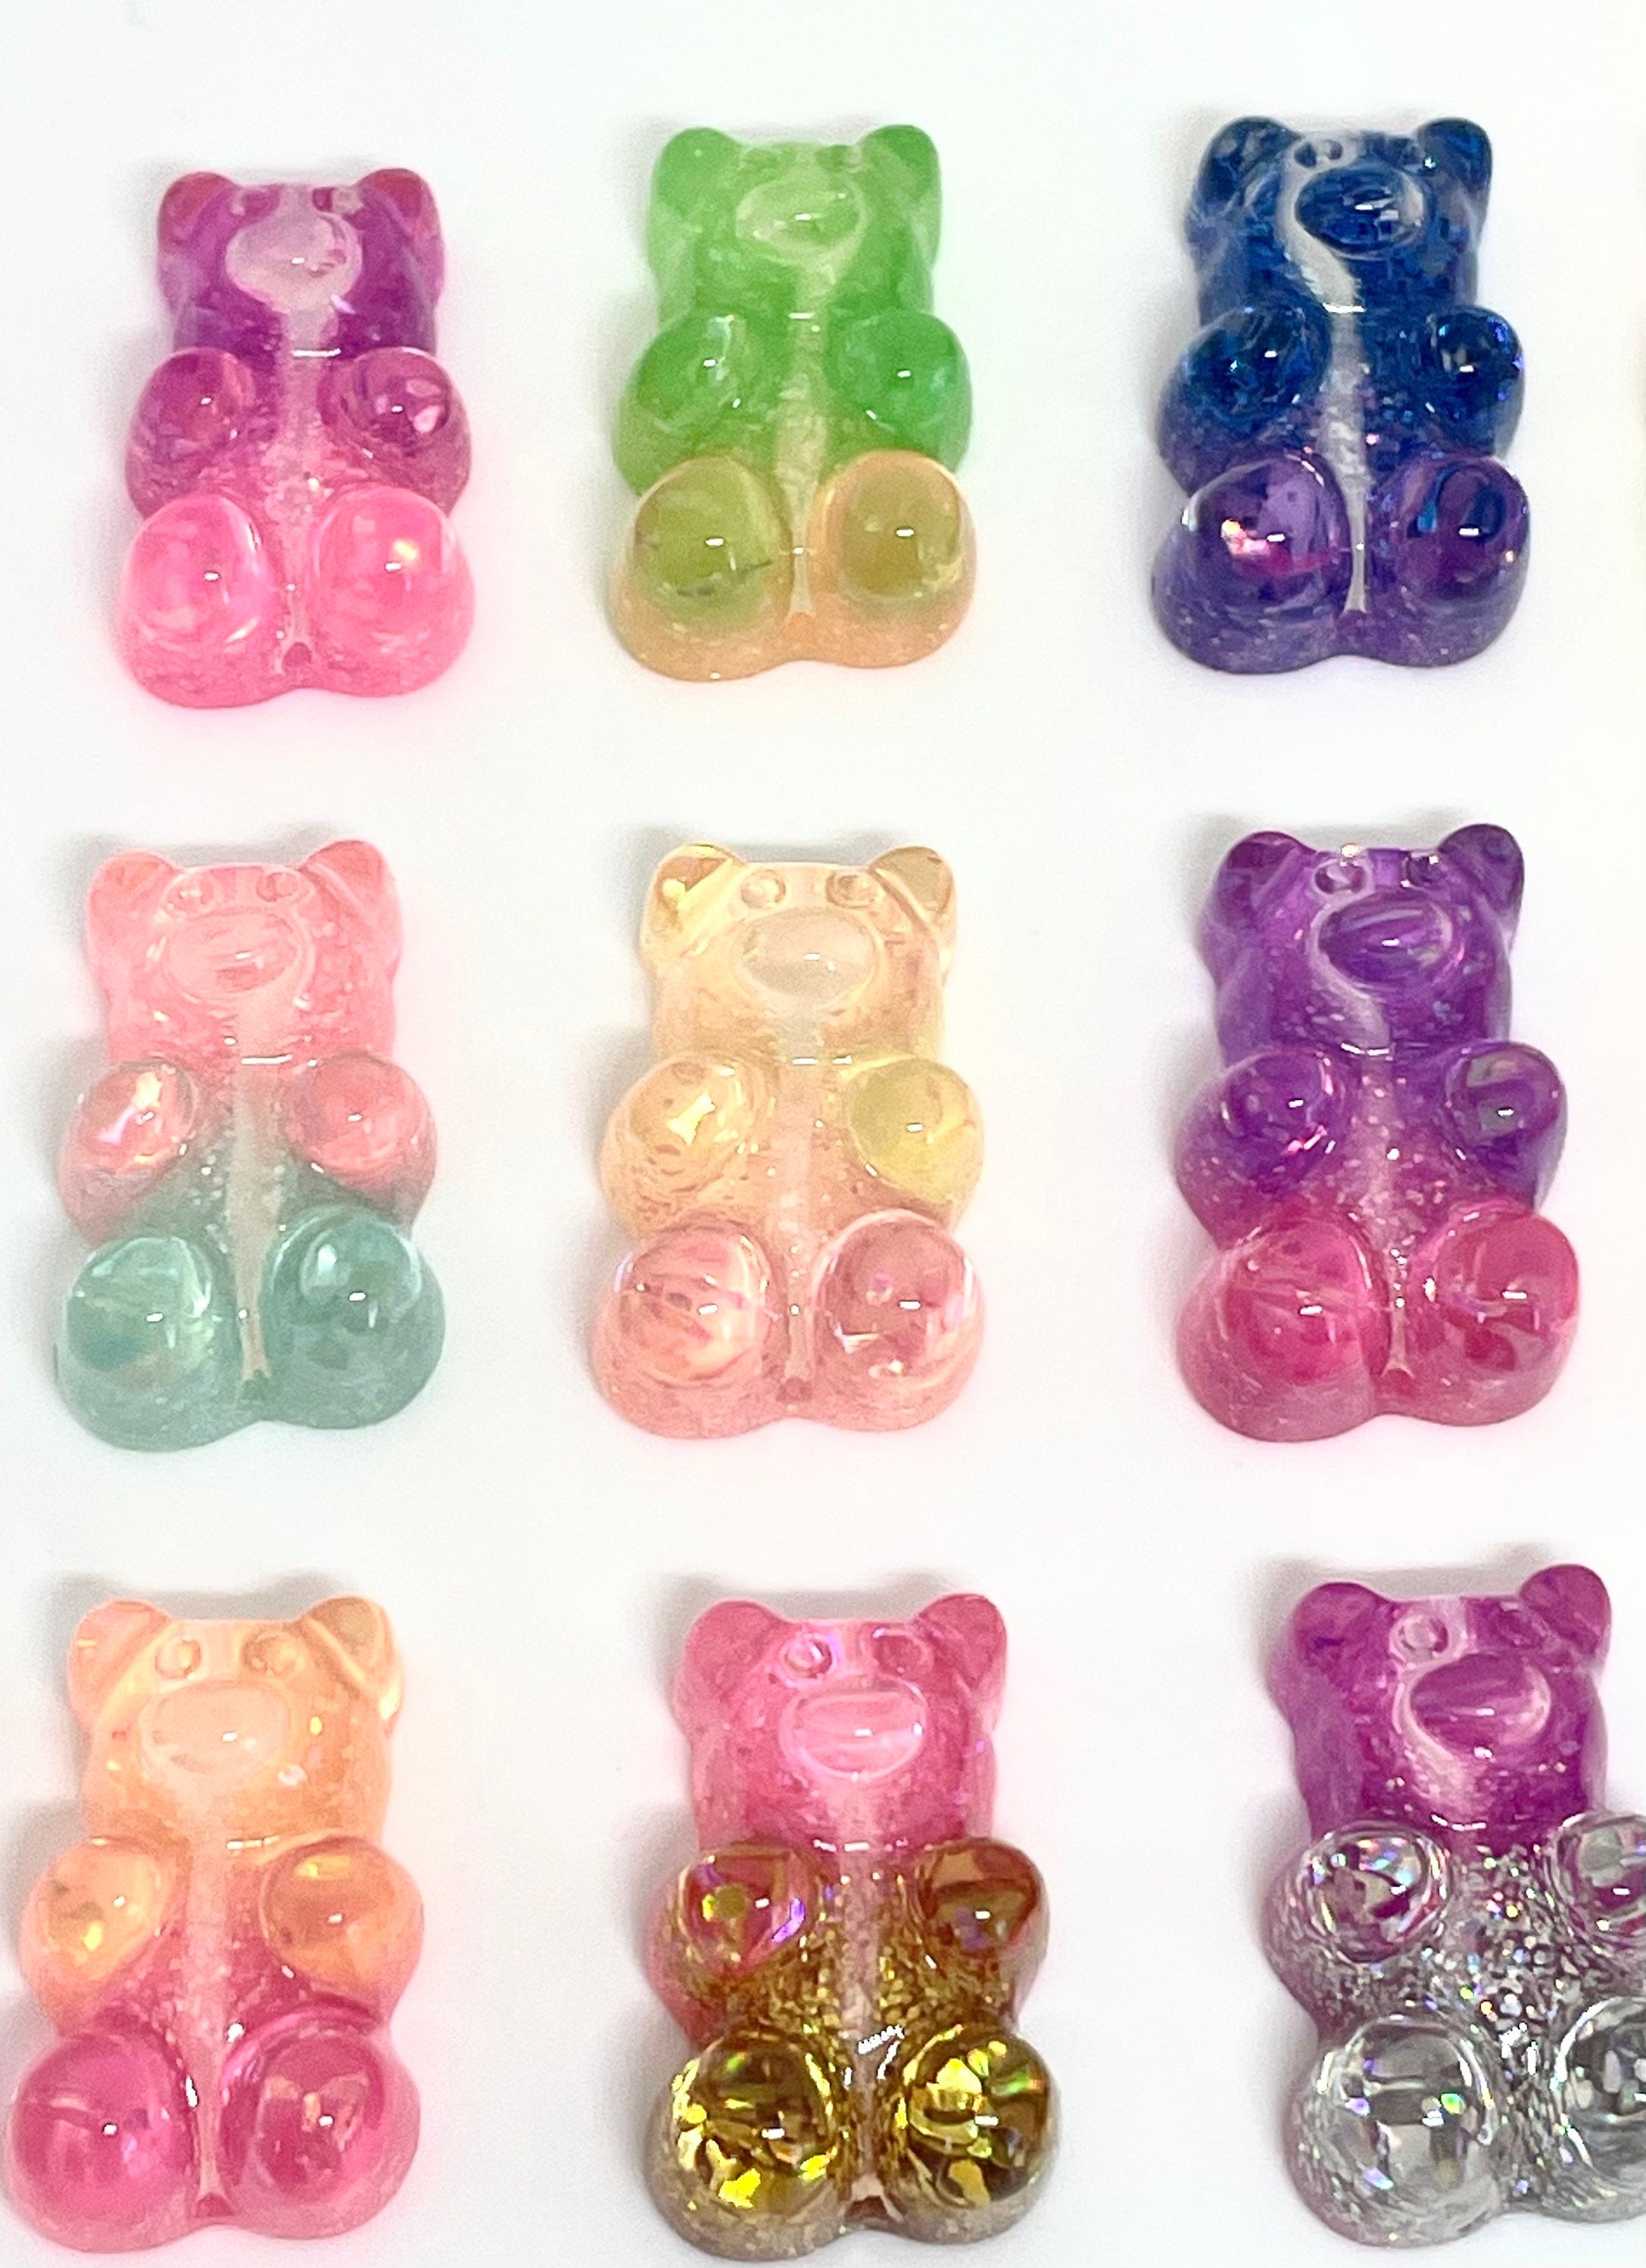 Resin Gummy Bear Beads for Earrings, Two-Toned Gummy Bear Charms for Jewelry Making, Candy Charms, Gummy Bear Pendants, Animal Beads 20 Pieces